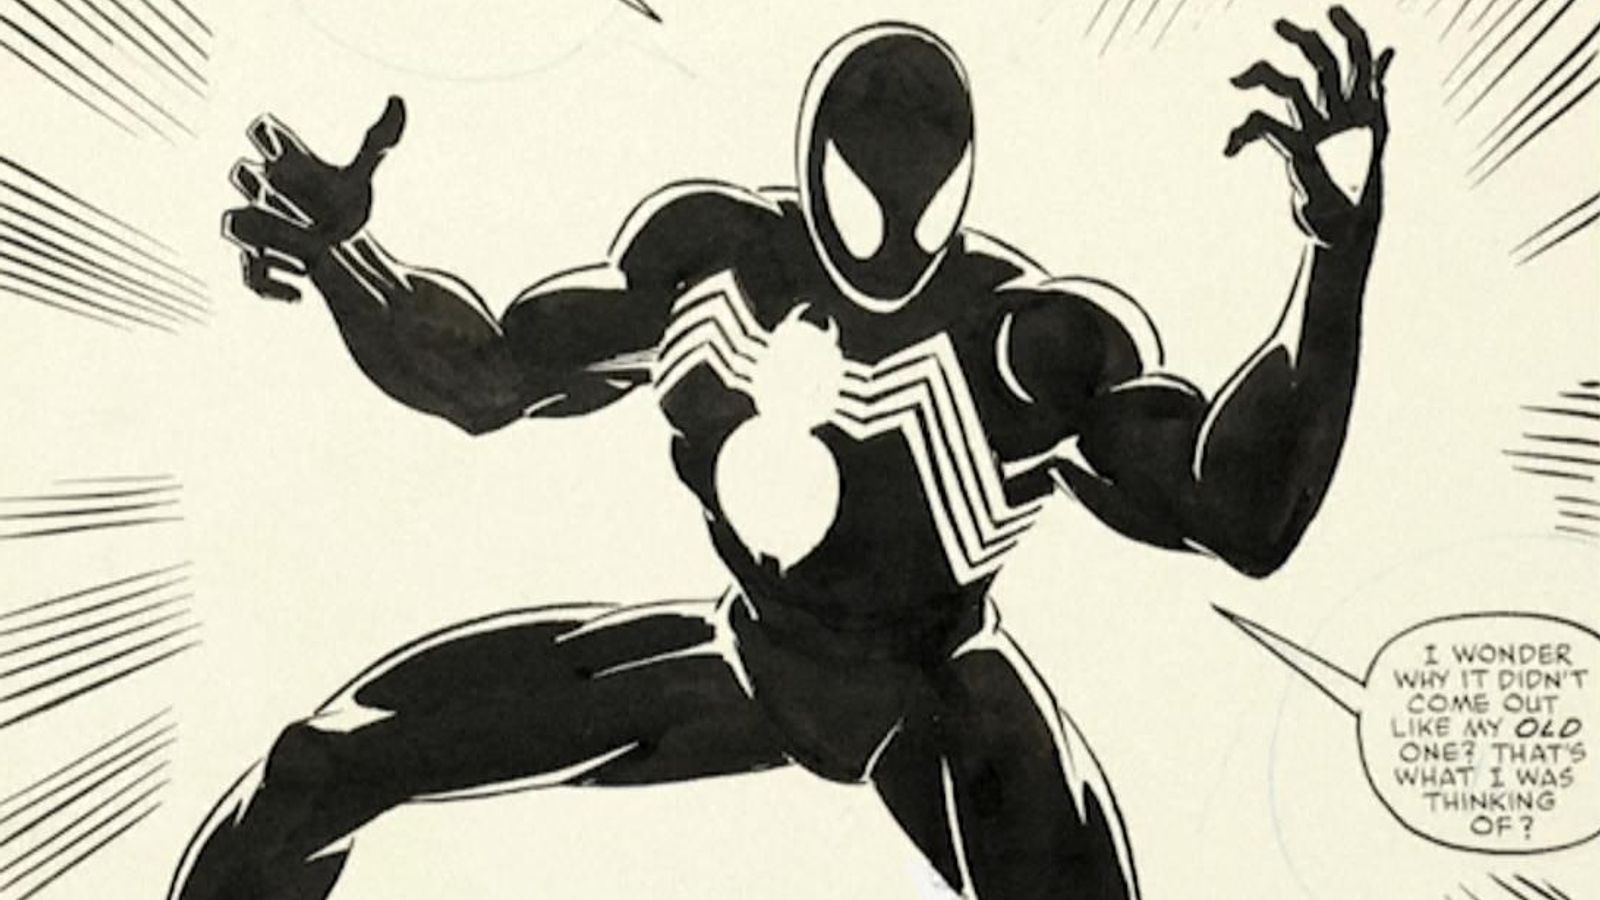 Spider-Man: Single page of comic sells for more than three million dollars